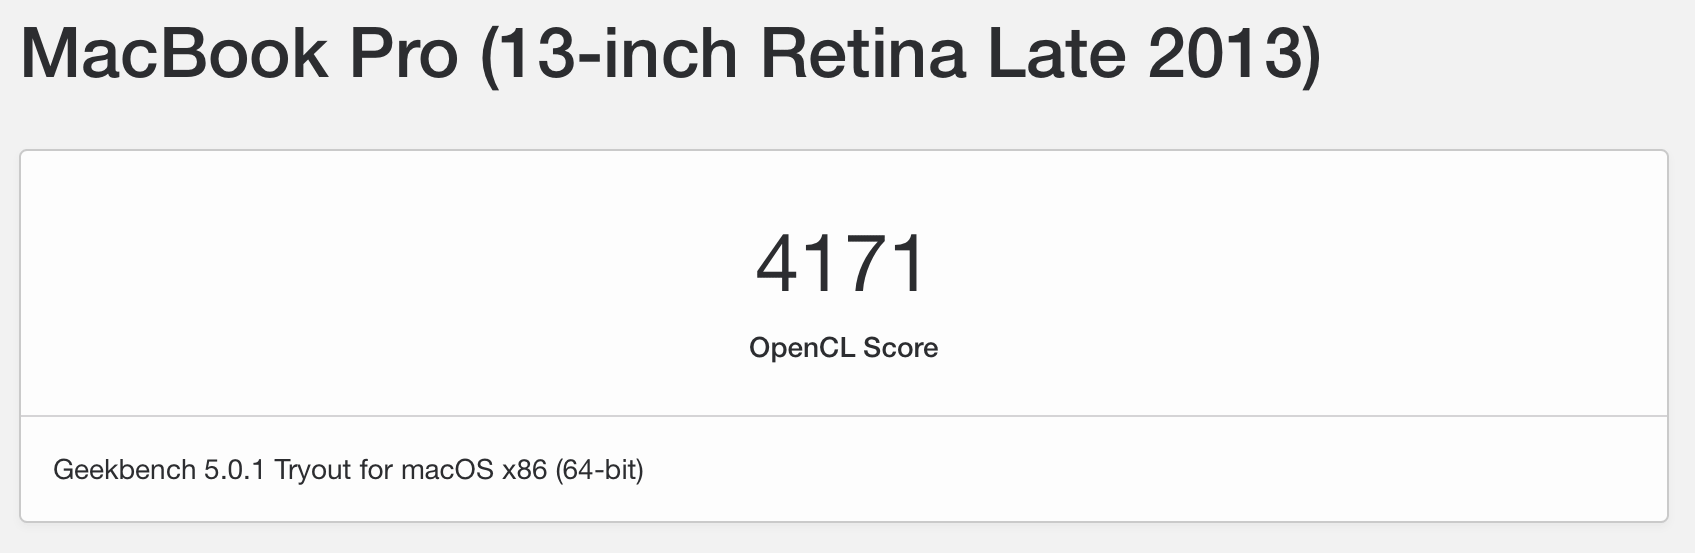 GPU Benchmark - OpenCL - result 1-1